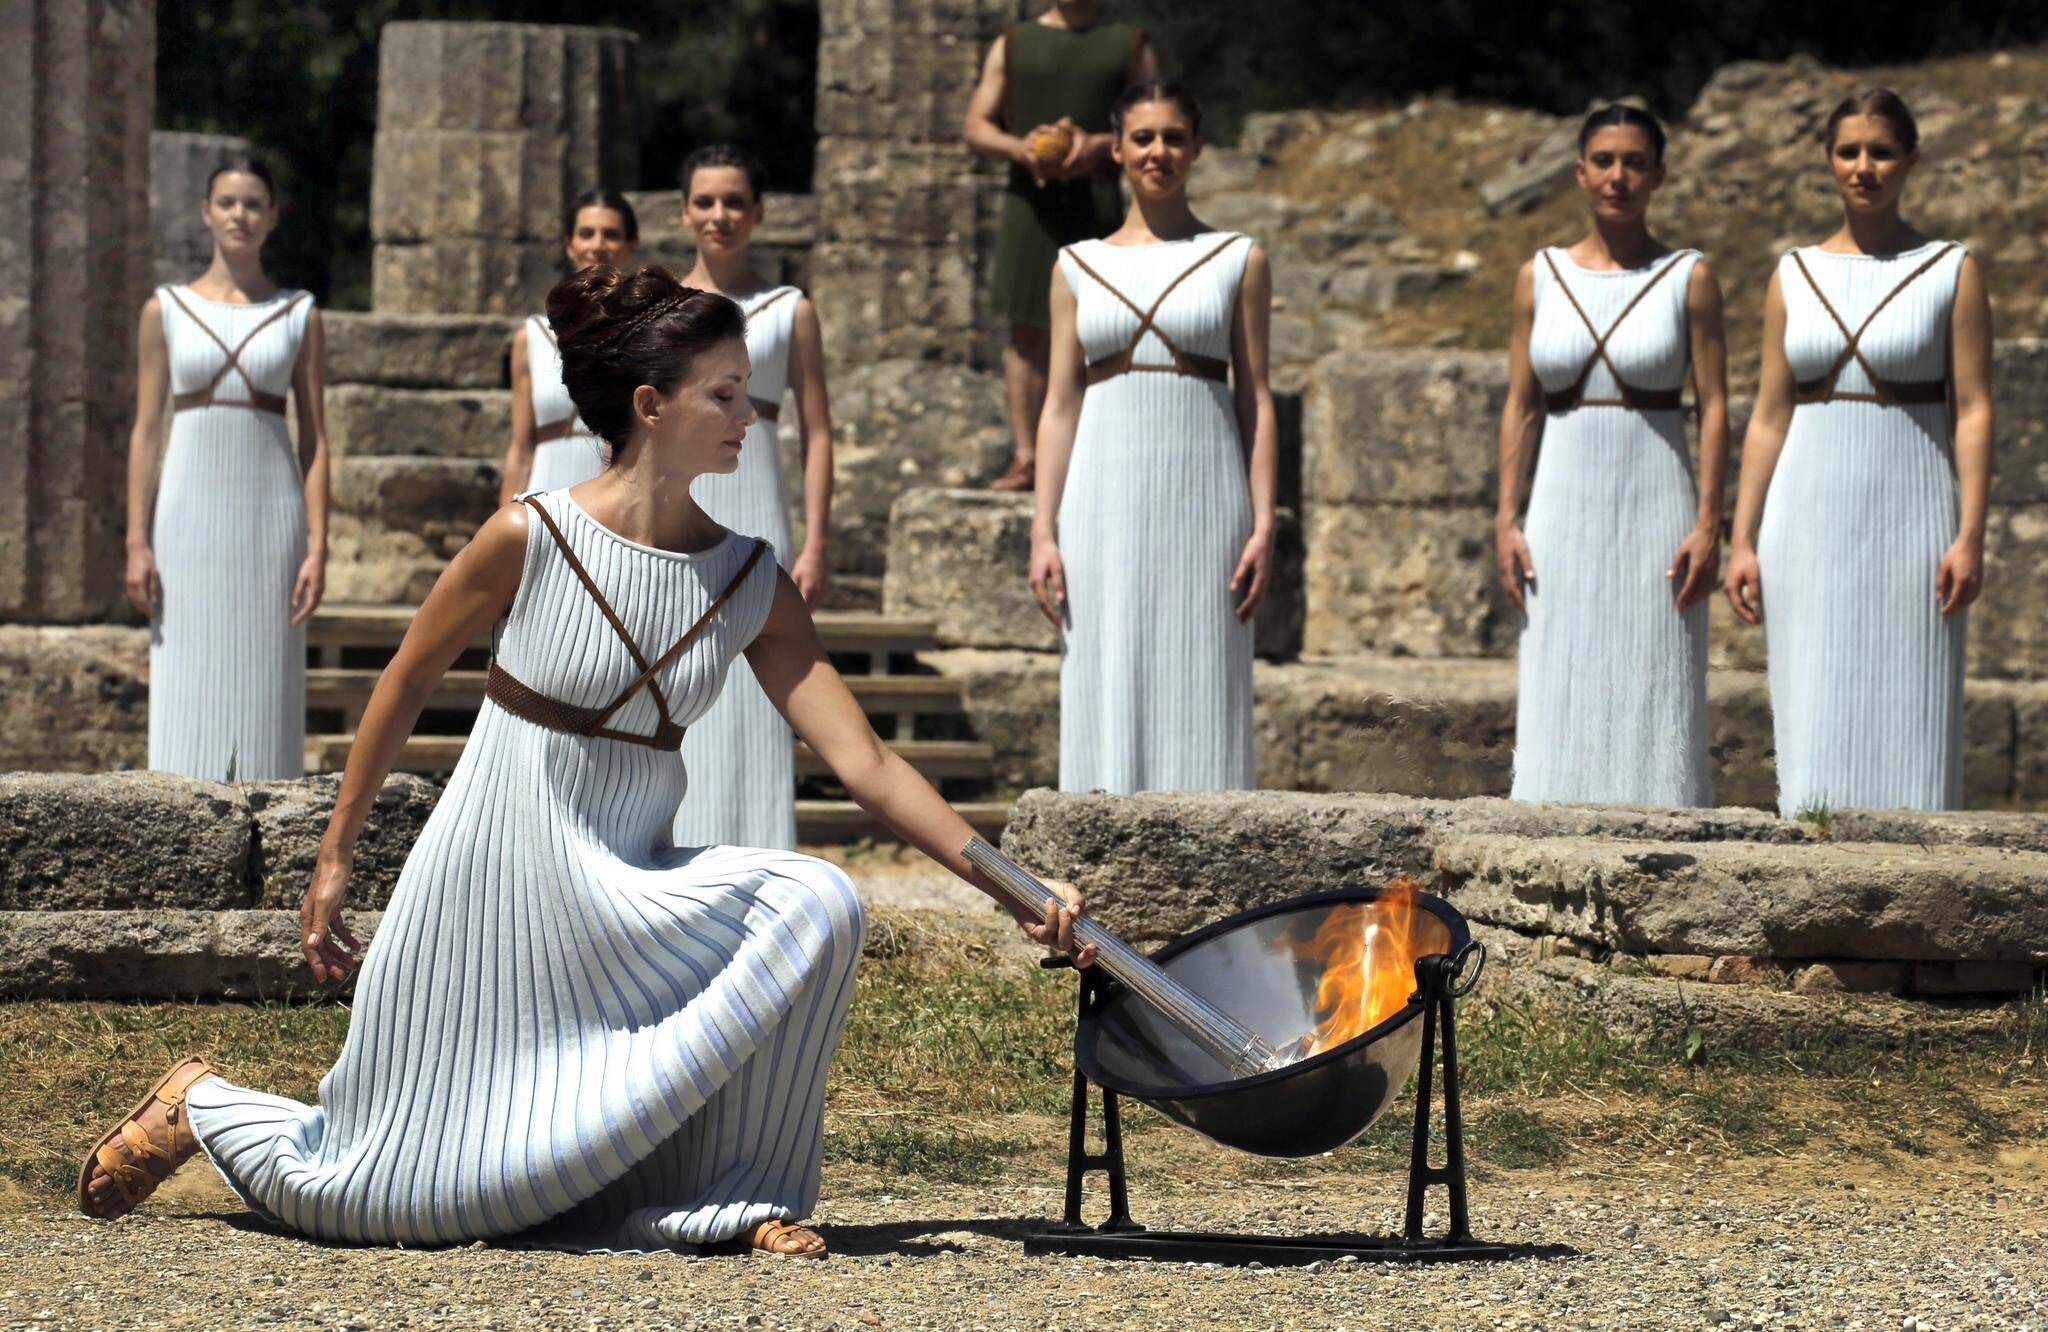 Greece prepares for Olympic flame-lighting ceremony - The Globe and Mail